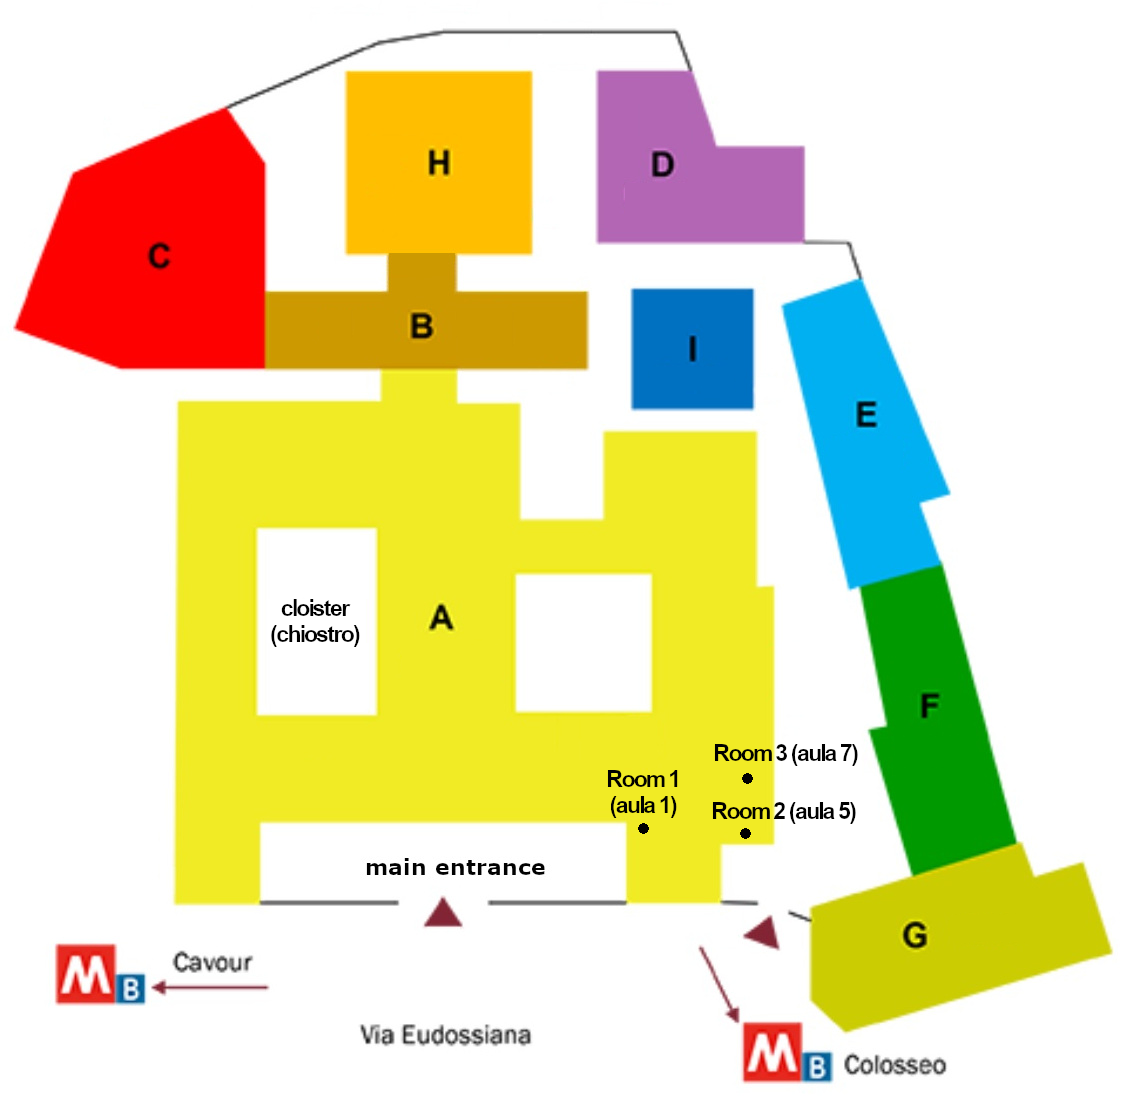 Map of the Engineering Faculty buildings